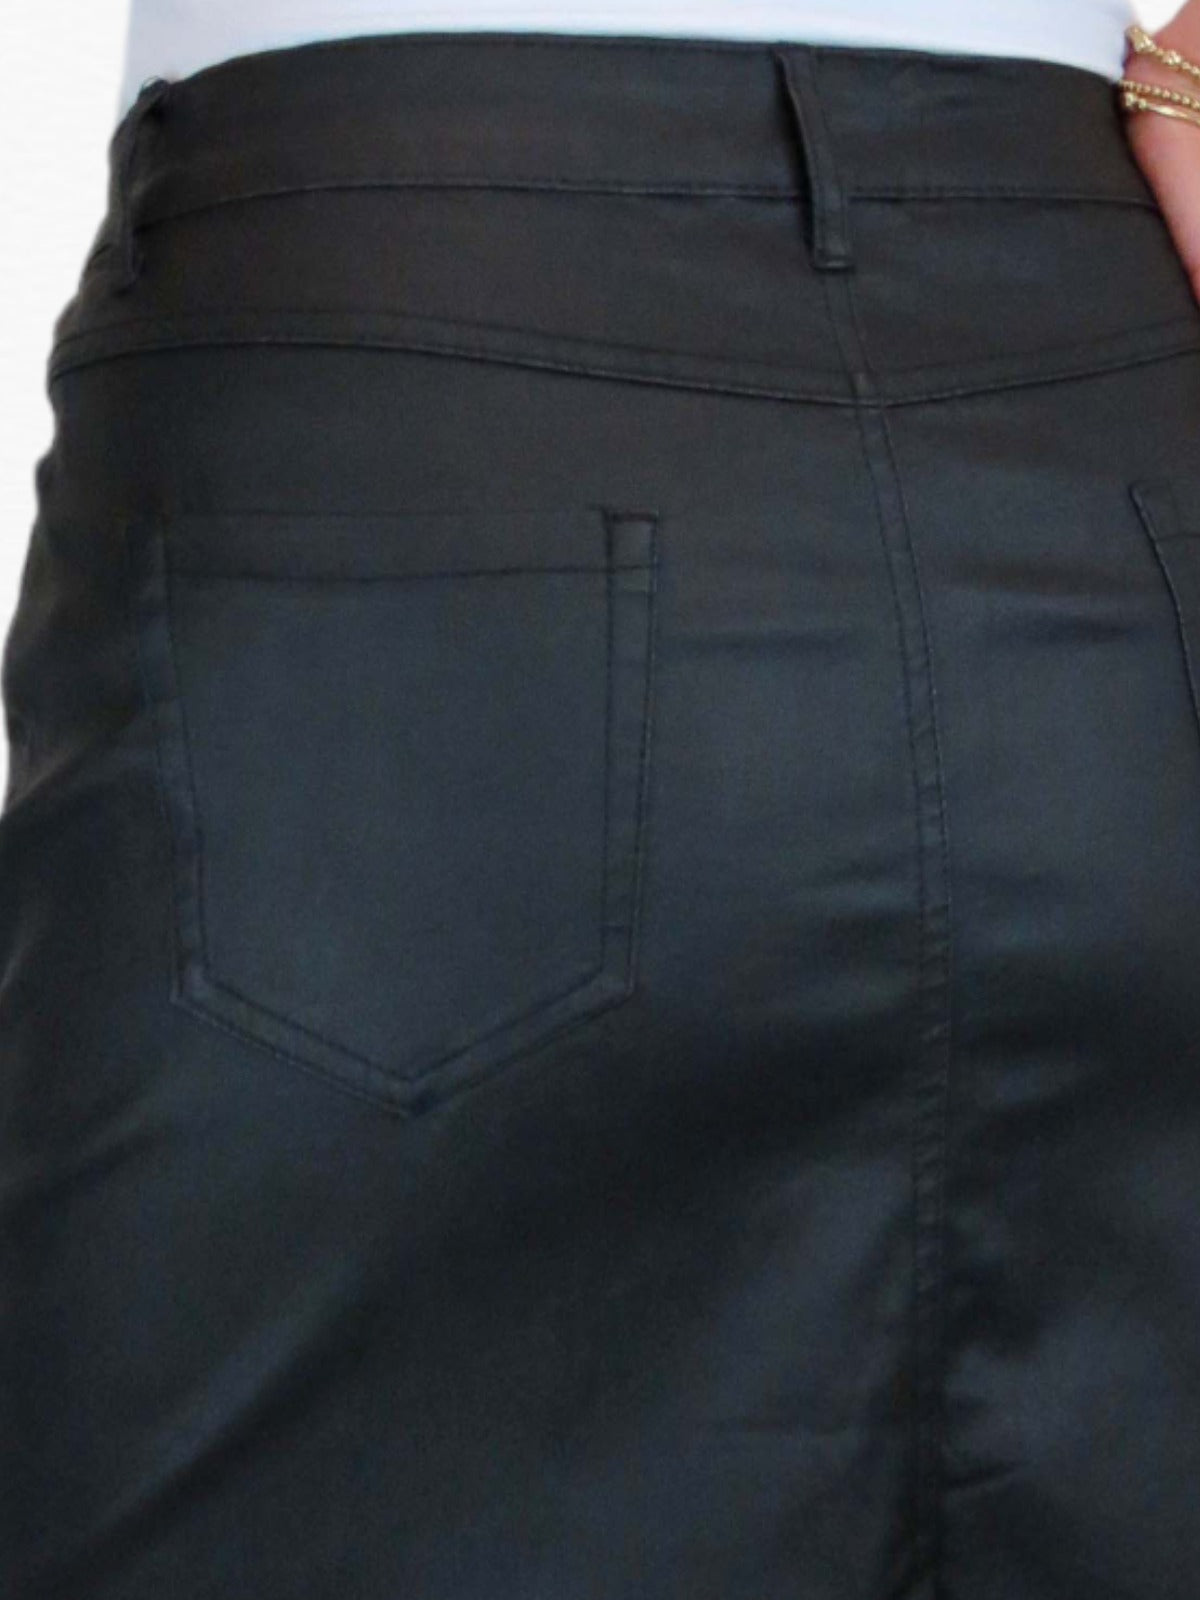 Women's Coated Leather Look Pencil Skirt Black